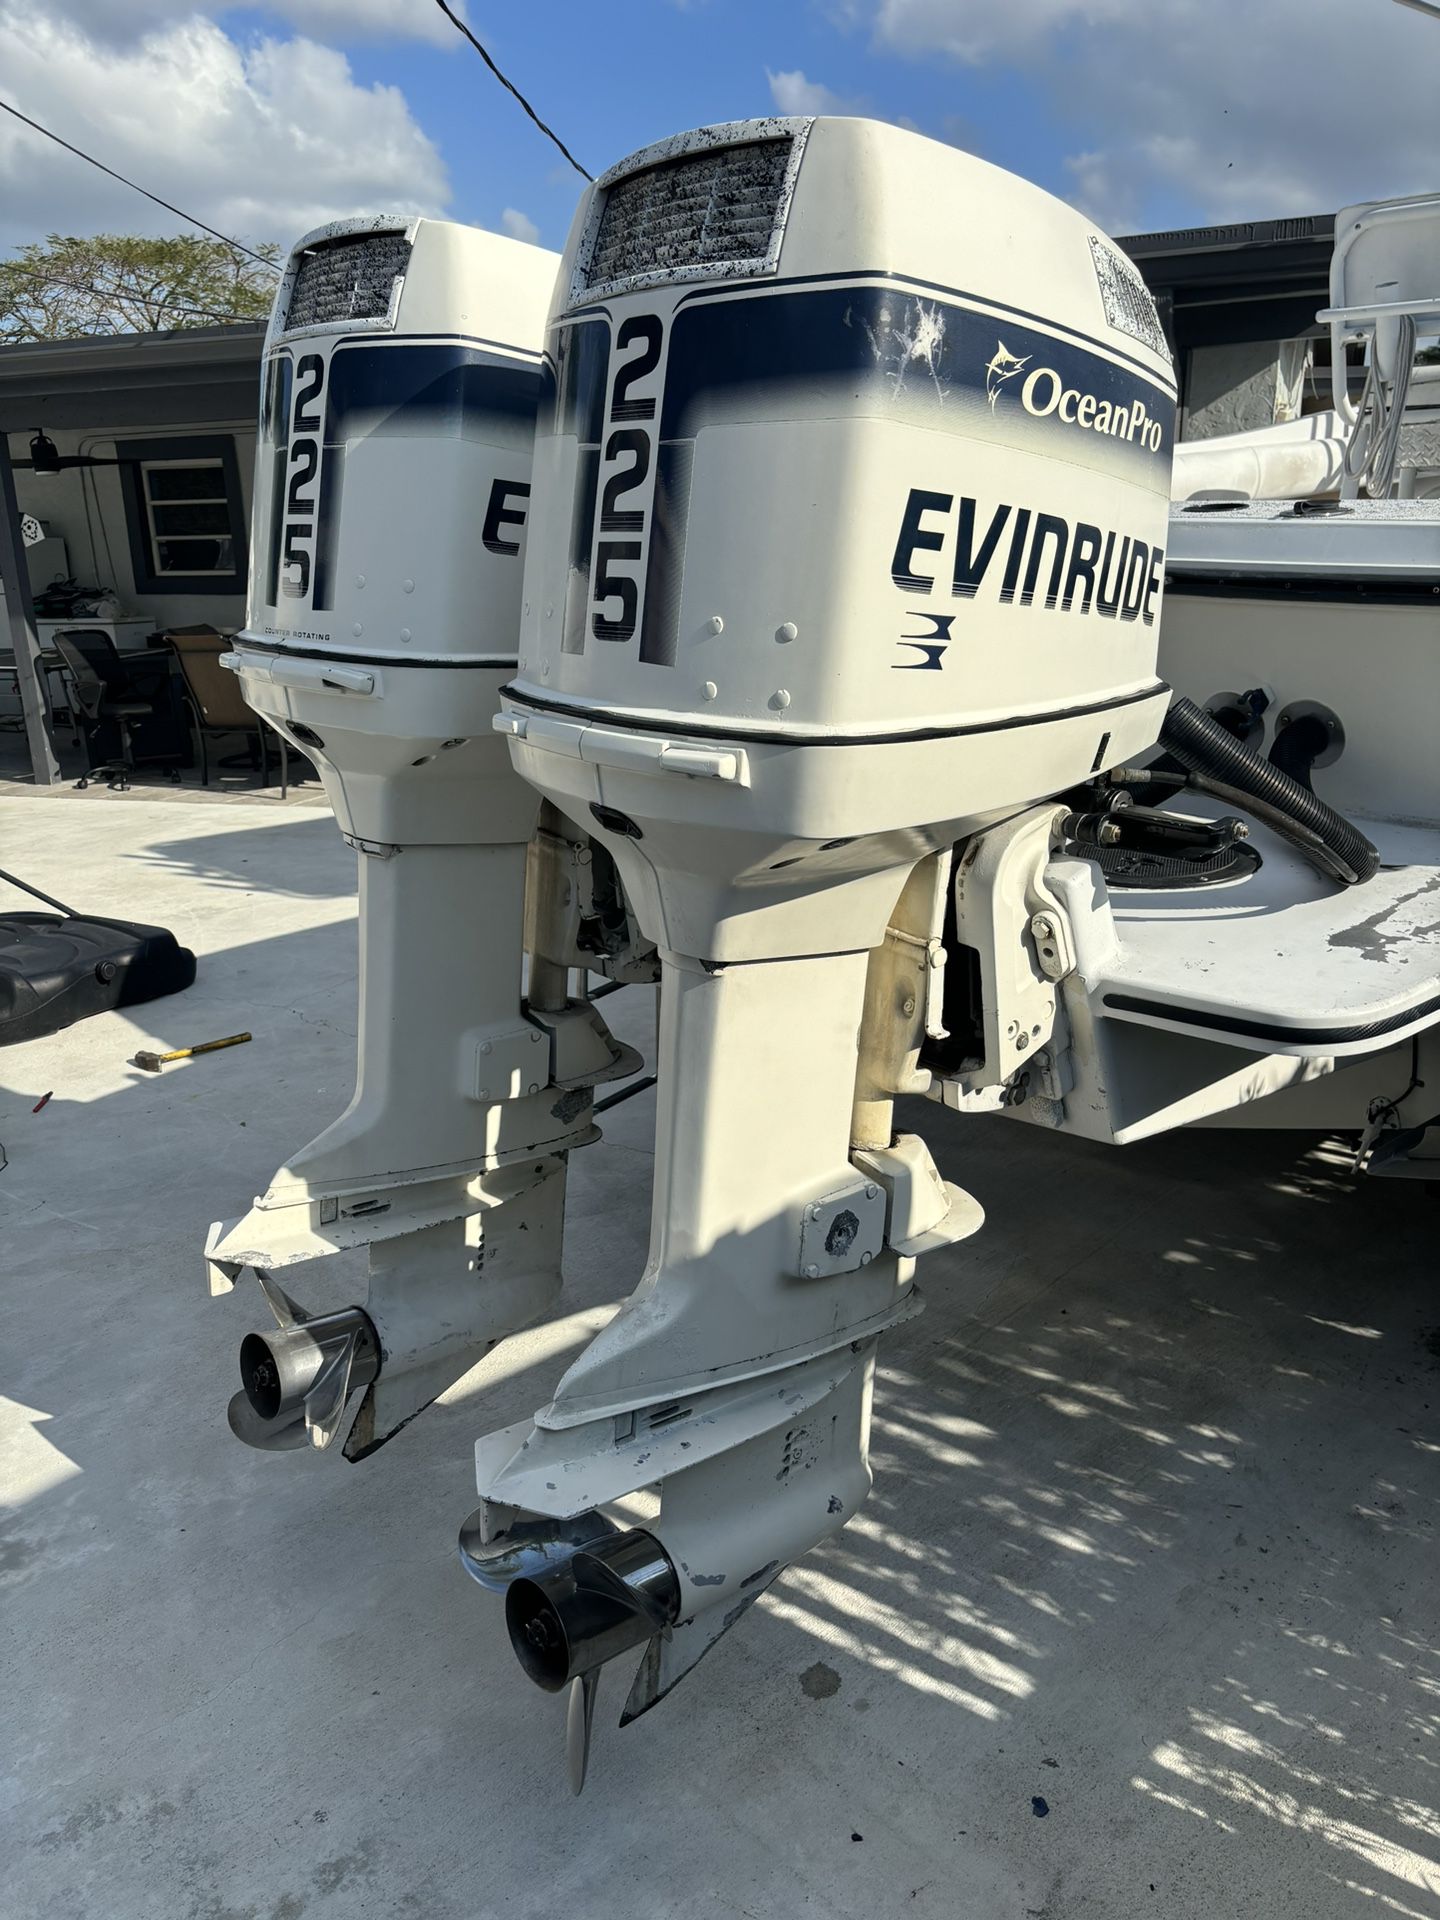 Evinrude 225 Twin Outboard Boat Motor 